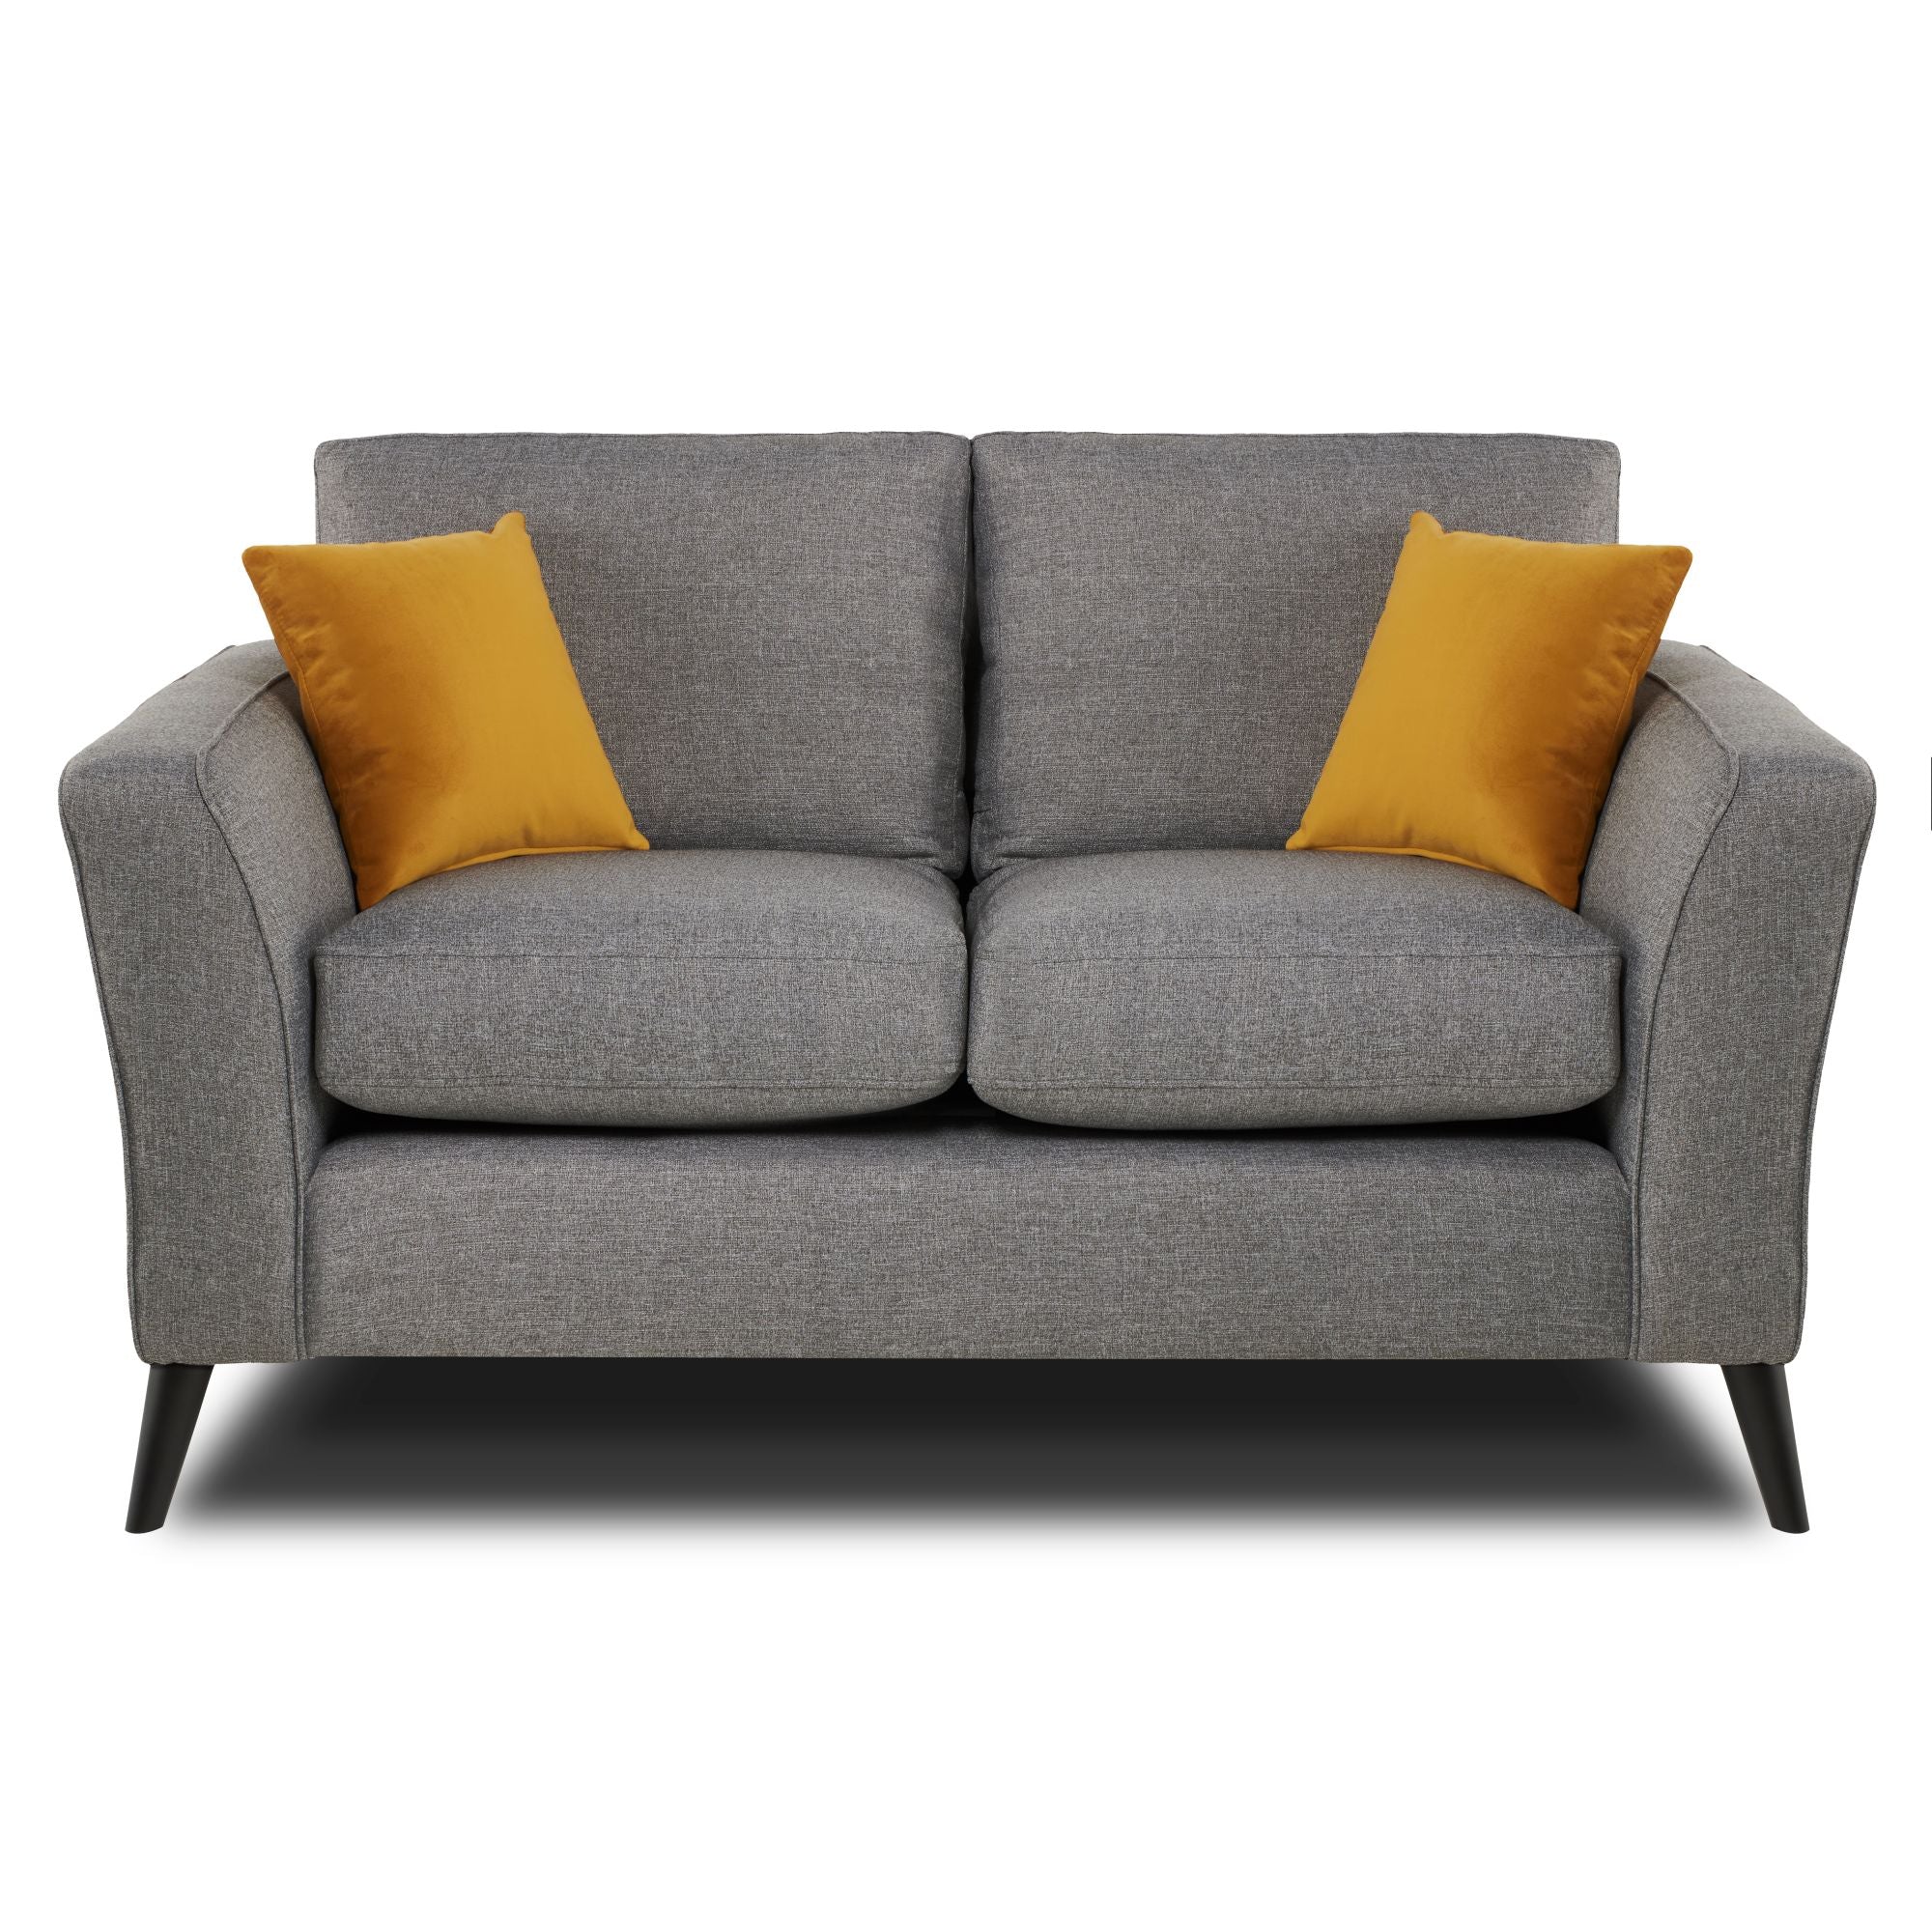 Libby 2 seater charcoal sofa with white background. 